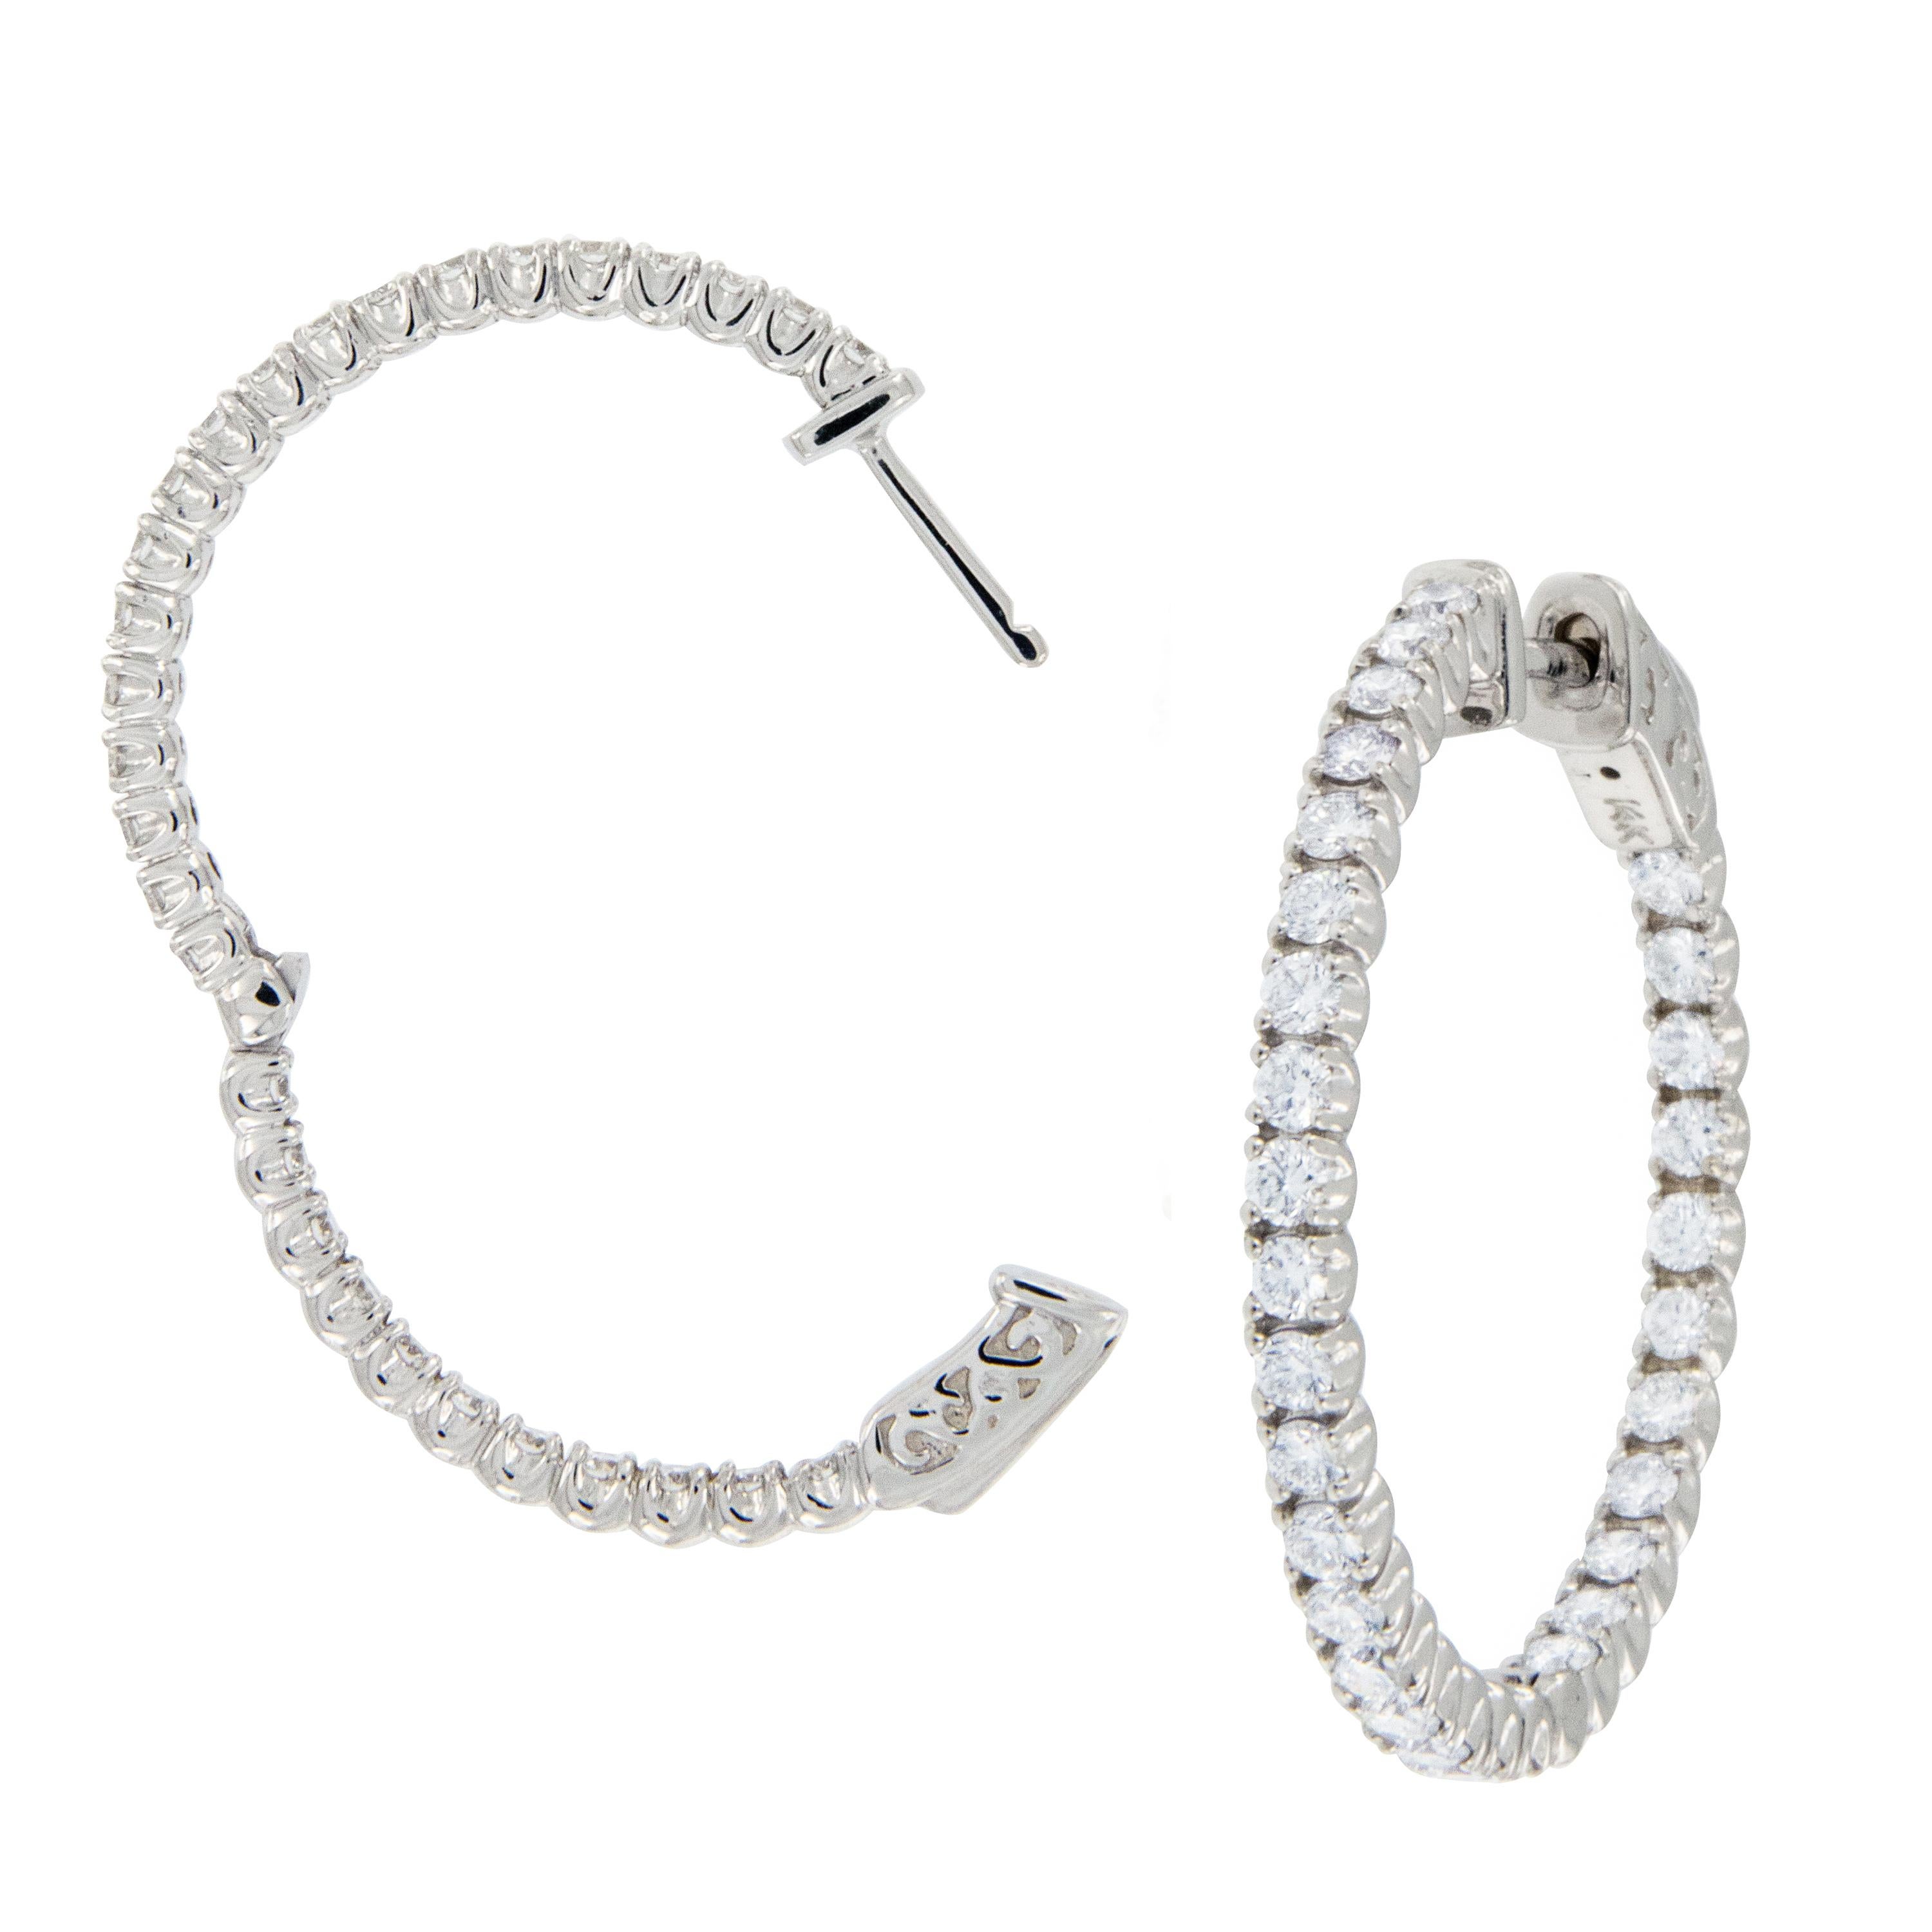 As timeless and classic as they get - these 14 karat white gold round diamond hoop earrings with 1.76 Cttw VS, F-G diamonds sparkle from front to back in the inside / outside style! Expertly crafted with hinge & locking backs for security of wear,